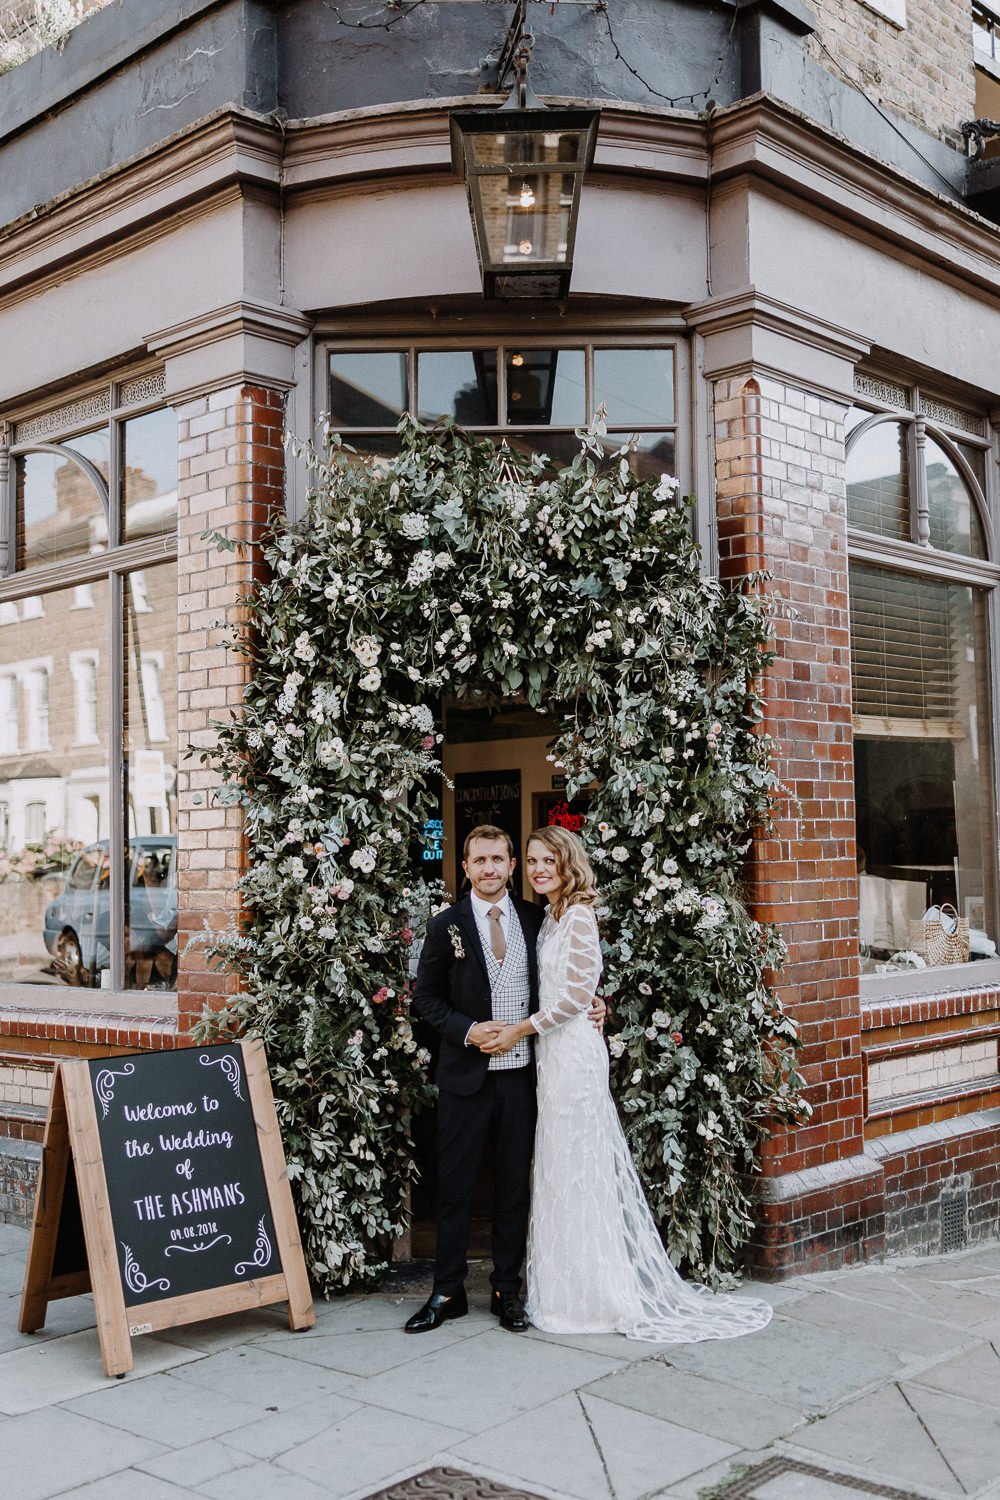 Beautiful bride Chloe wore a wedding dress by Halfpenny London | Image by Caitlin and Jones (http://www.caitlinandjones.co.uk/)